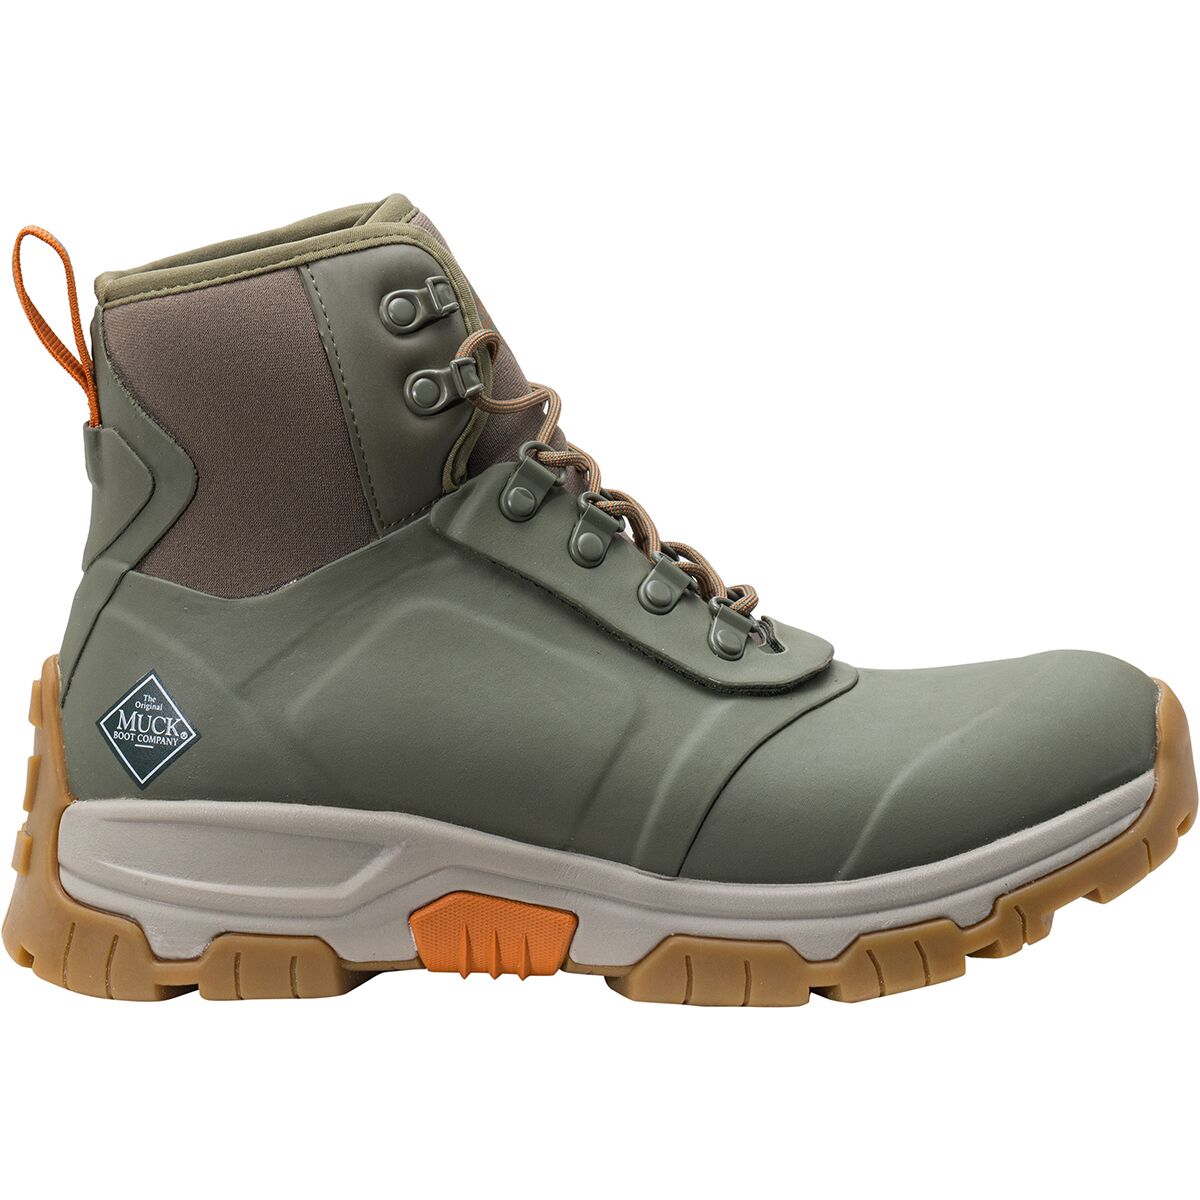 Muck Boots Apex Lace U Hiking Boot - Men's